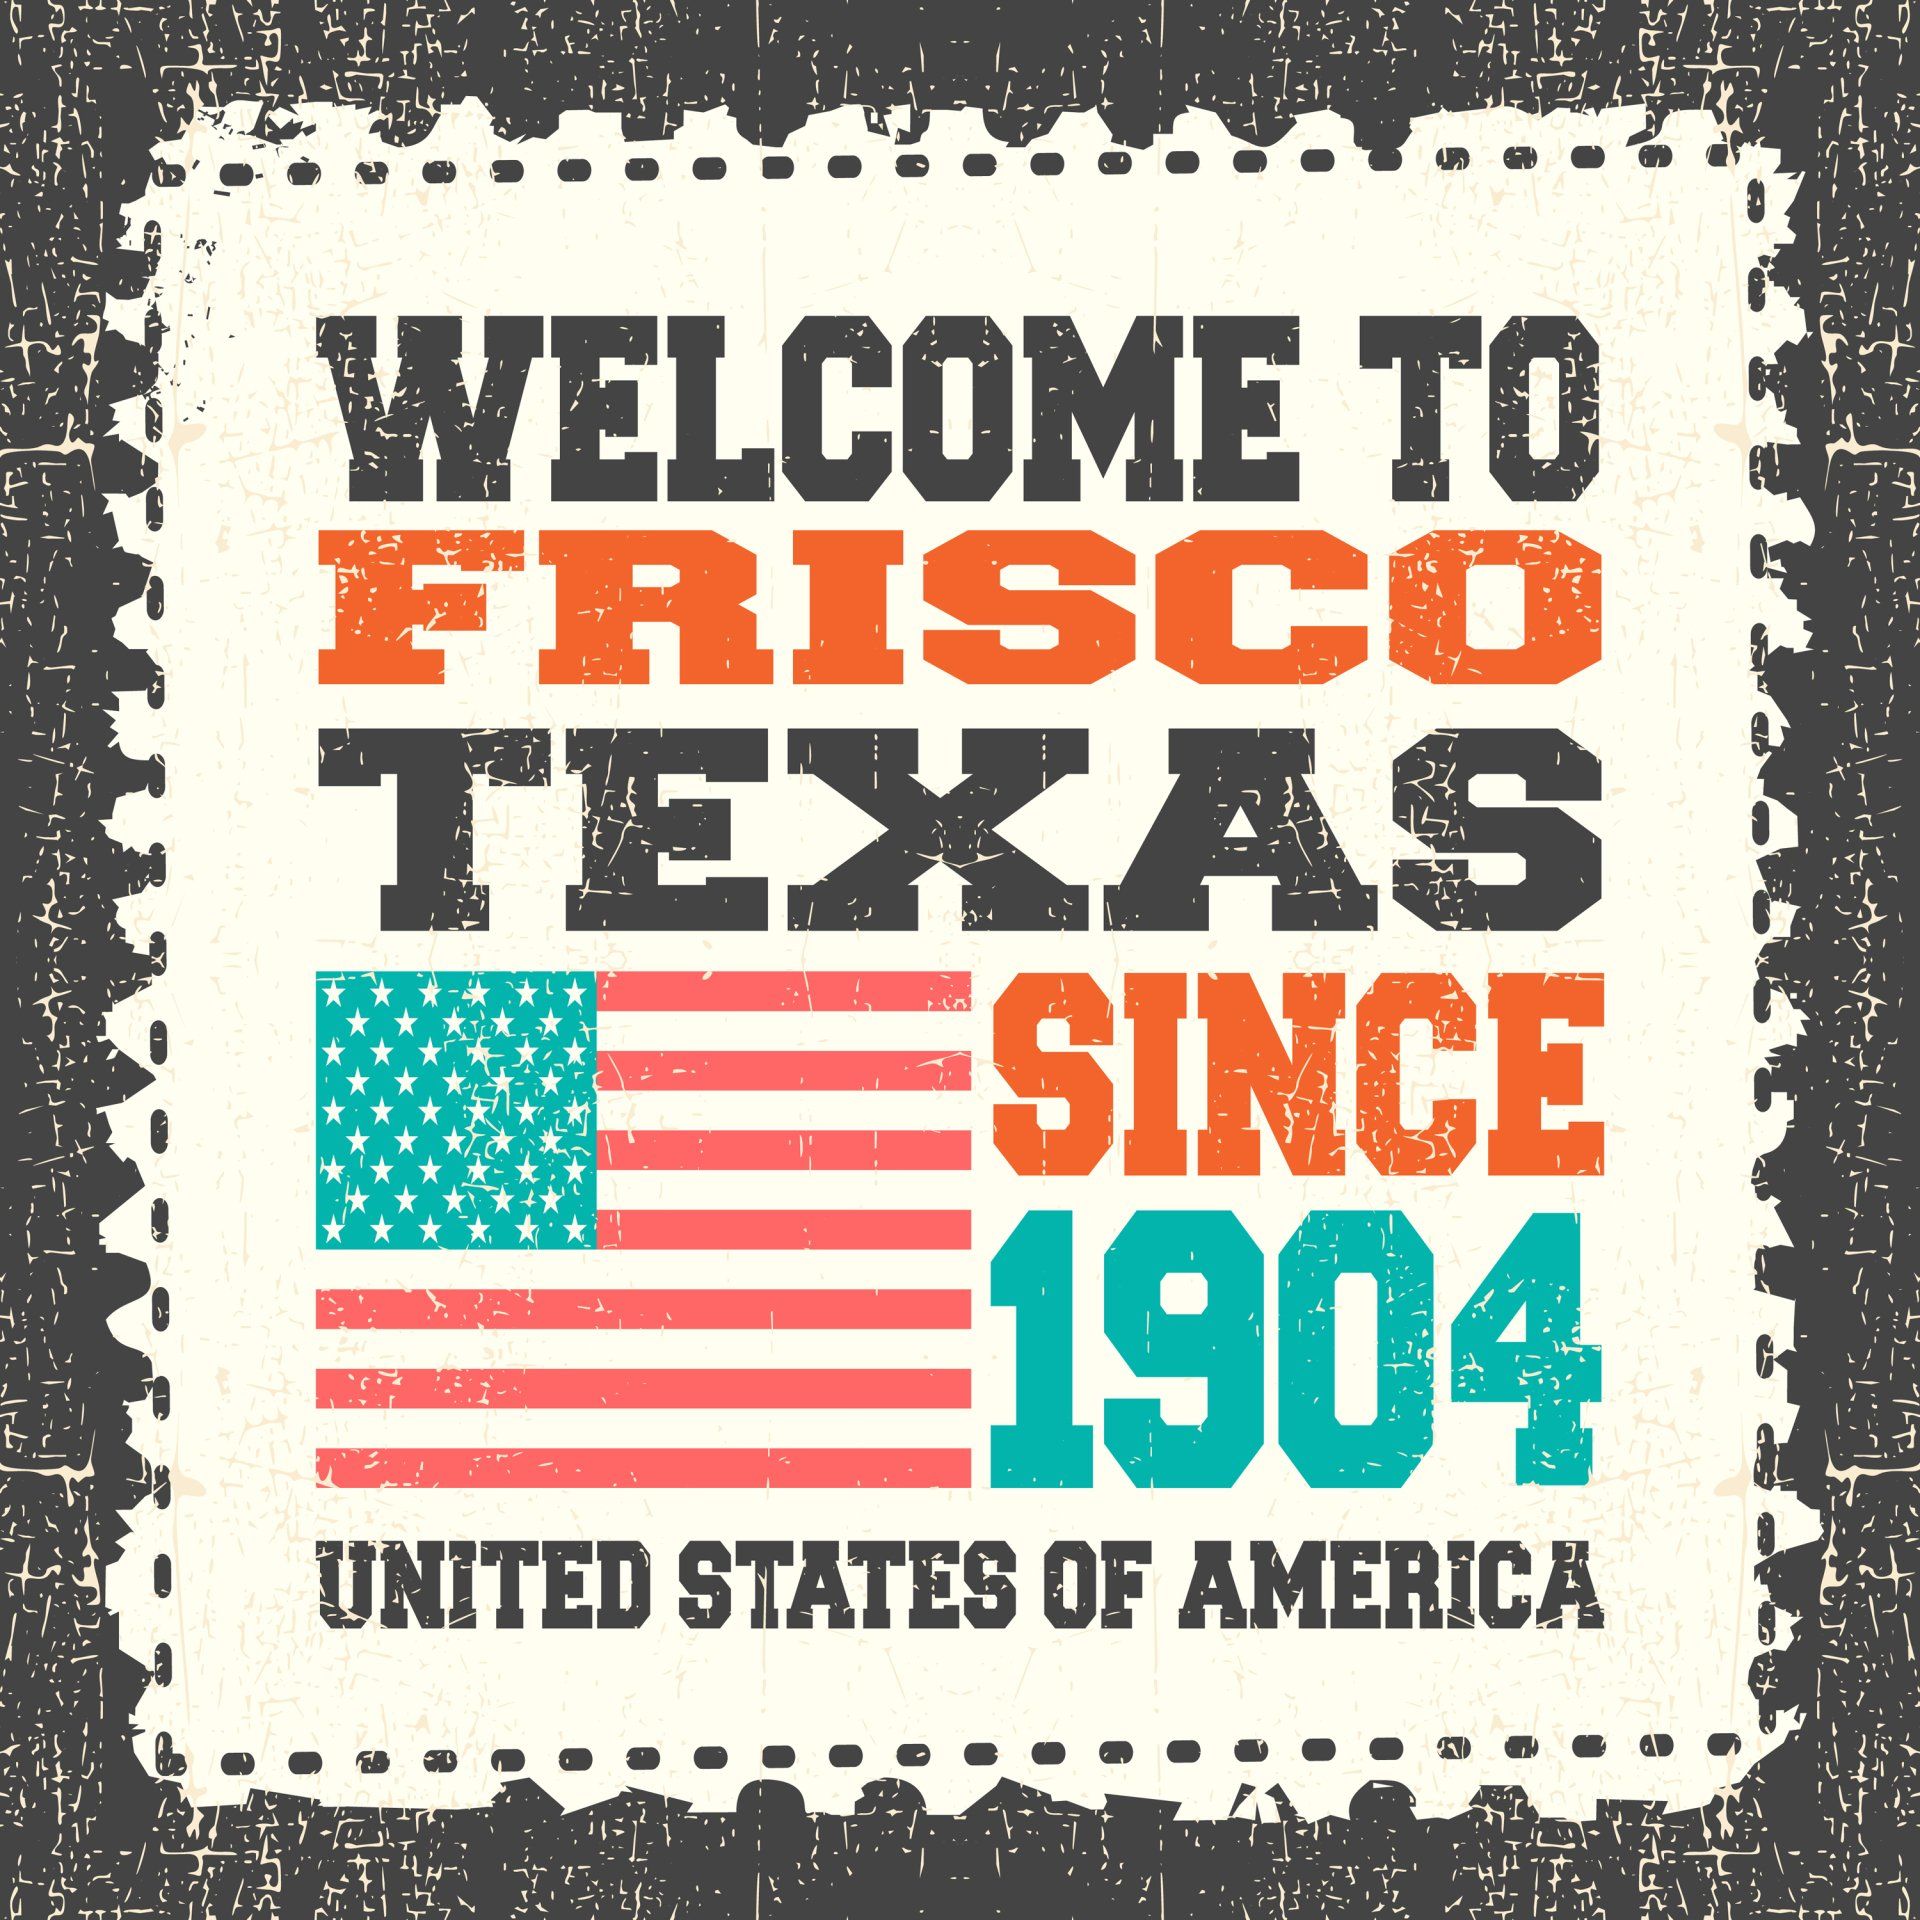 A sign that says welcome to frisco texas since 1904